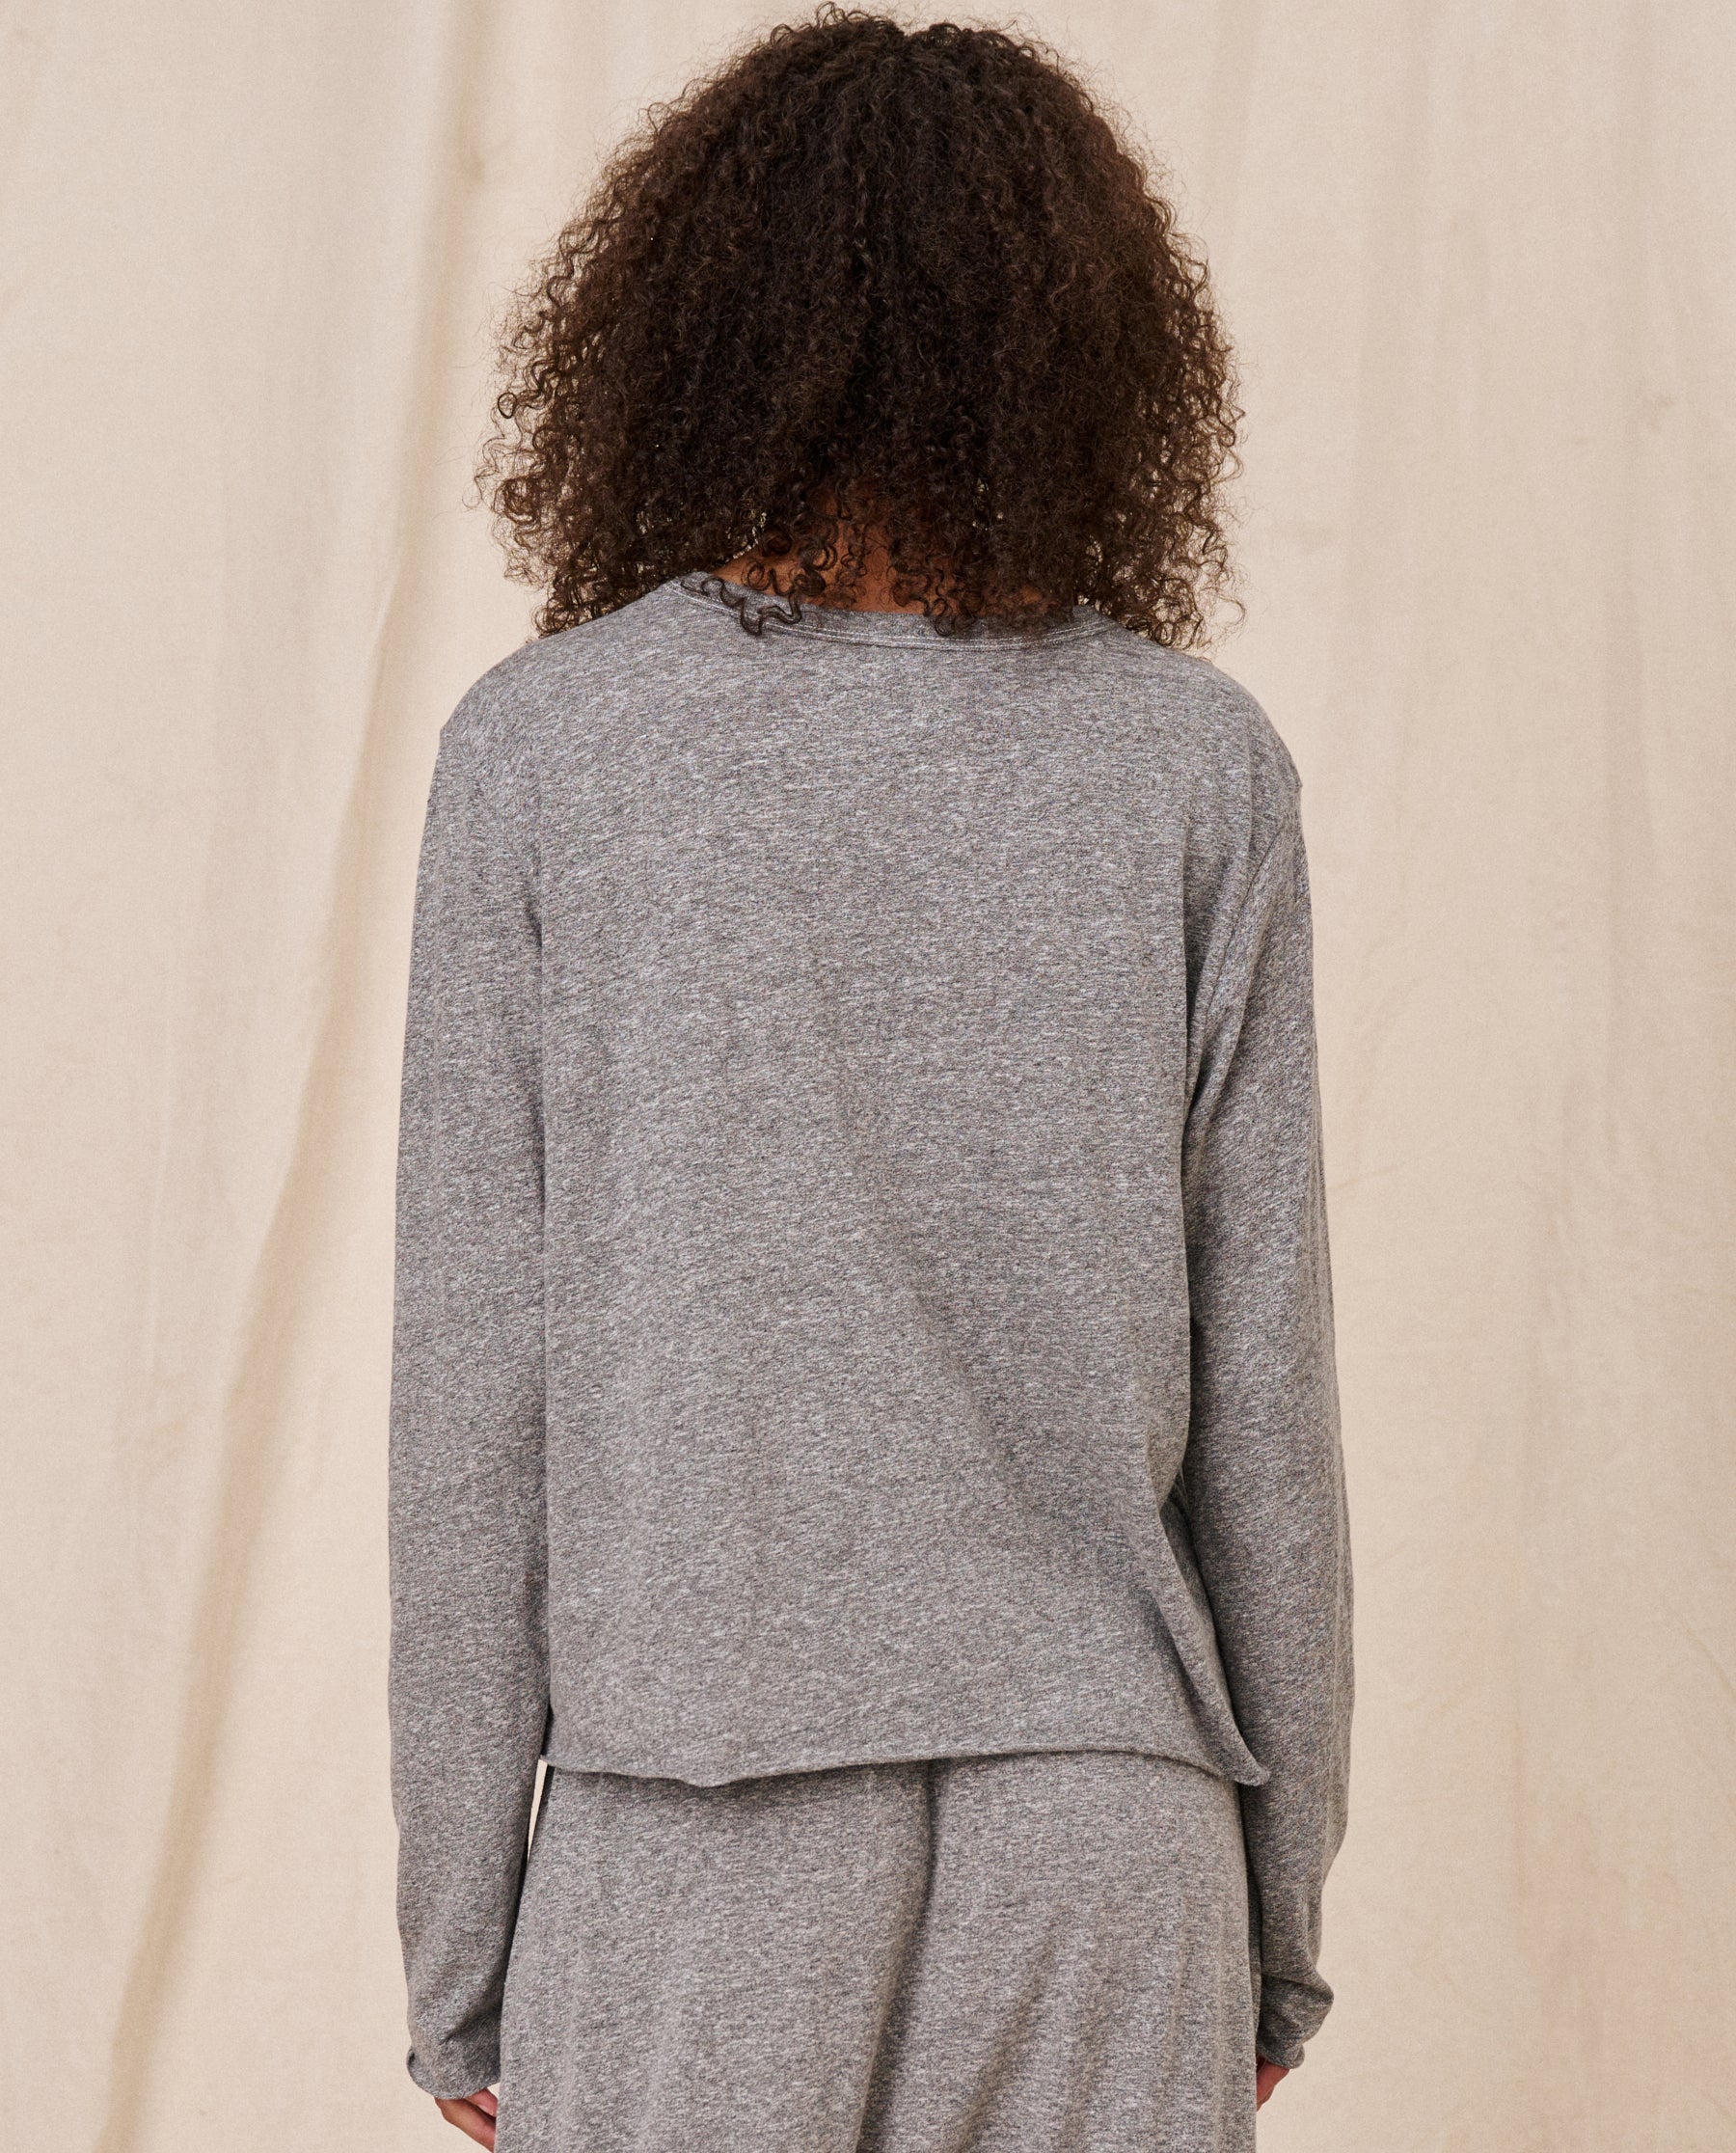 The Long Sleeve Crop Tee. -- Heather Grey TEES THE GREAT. CORE KNITS